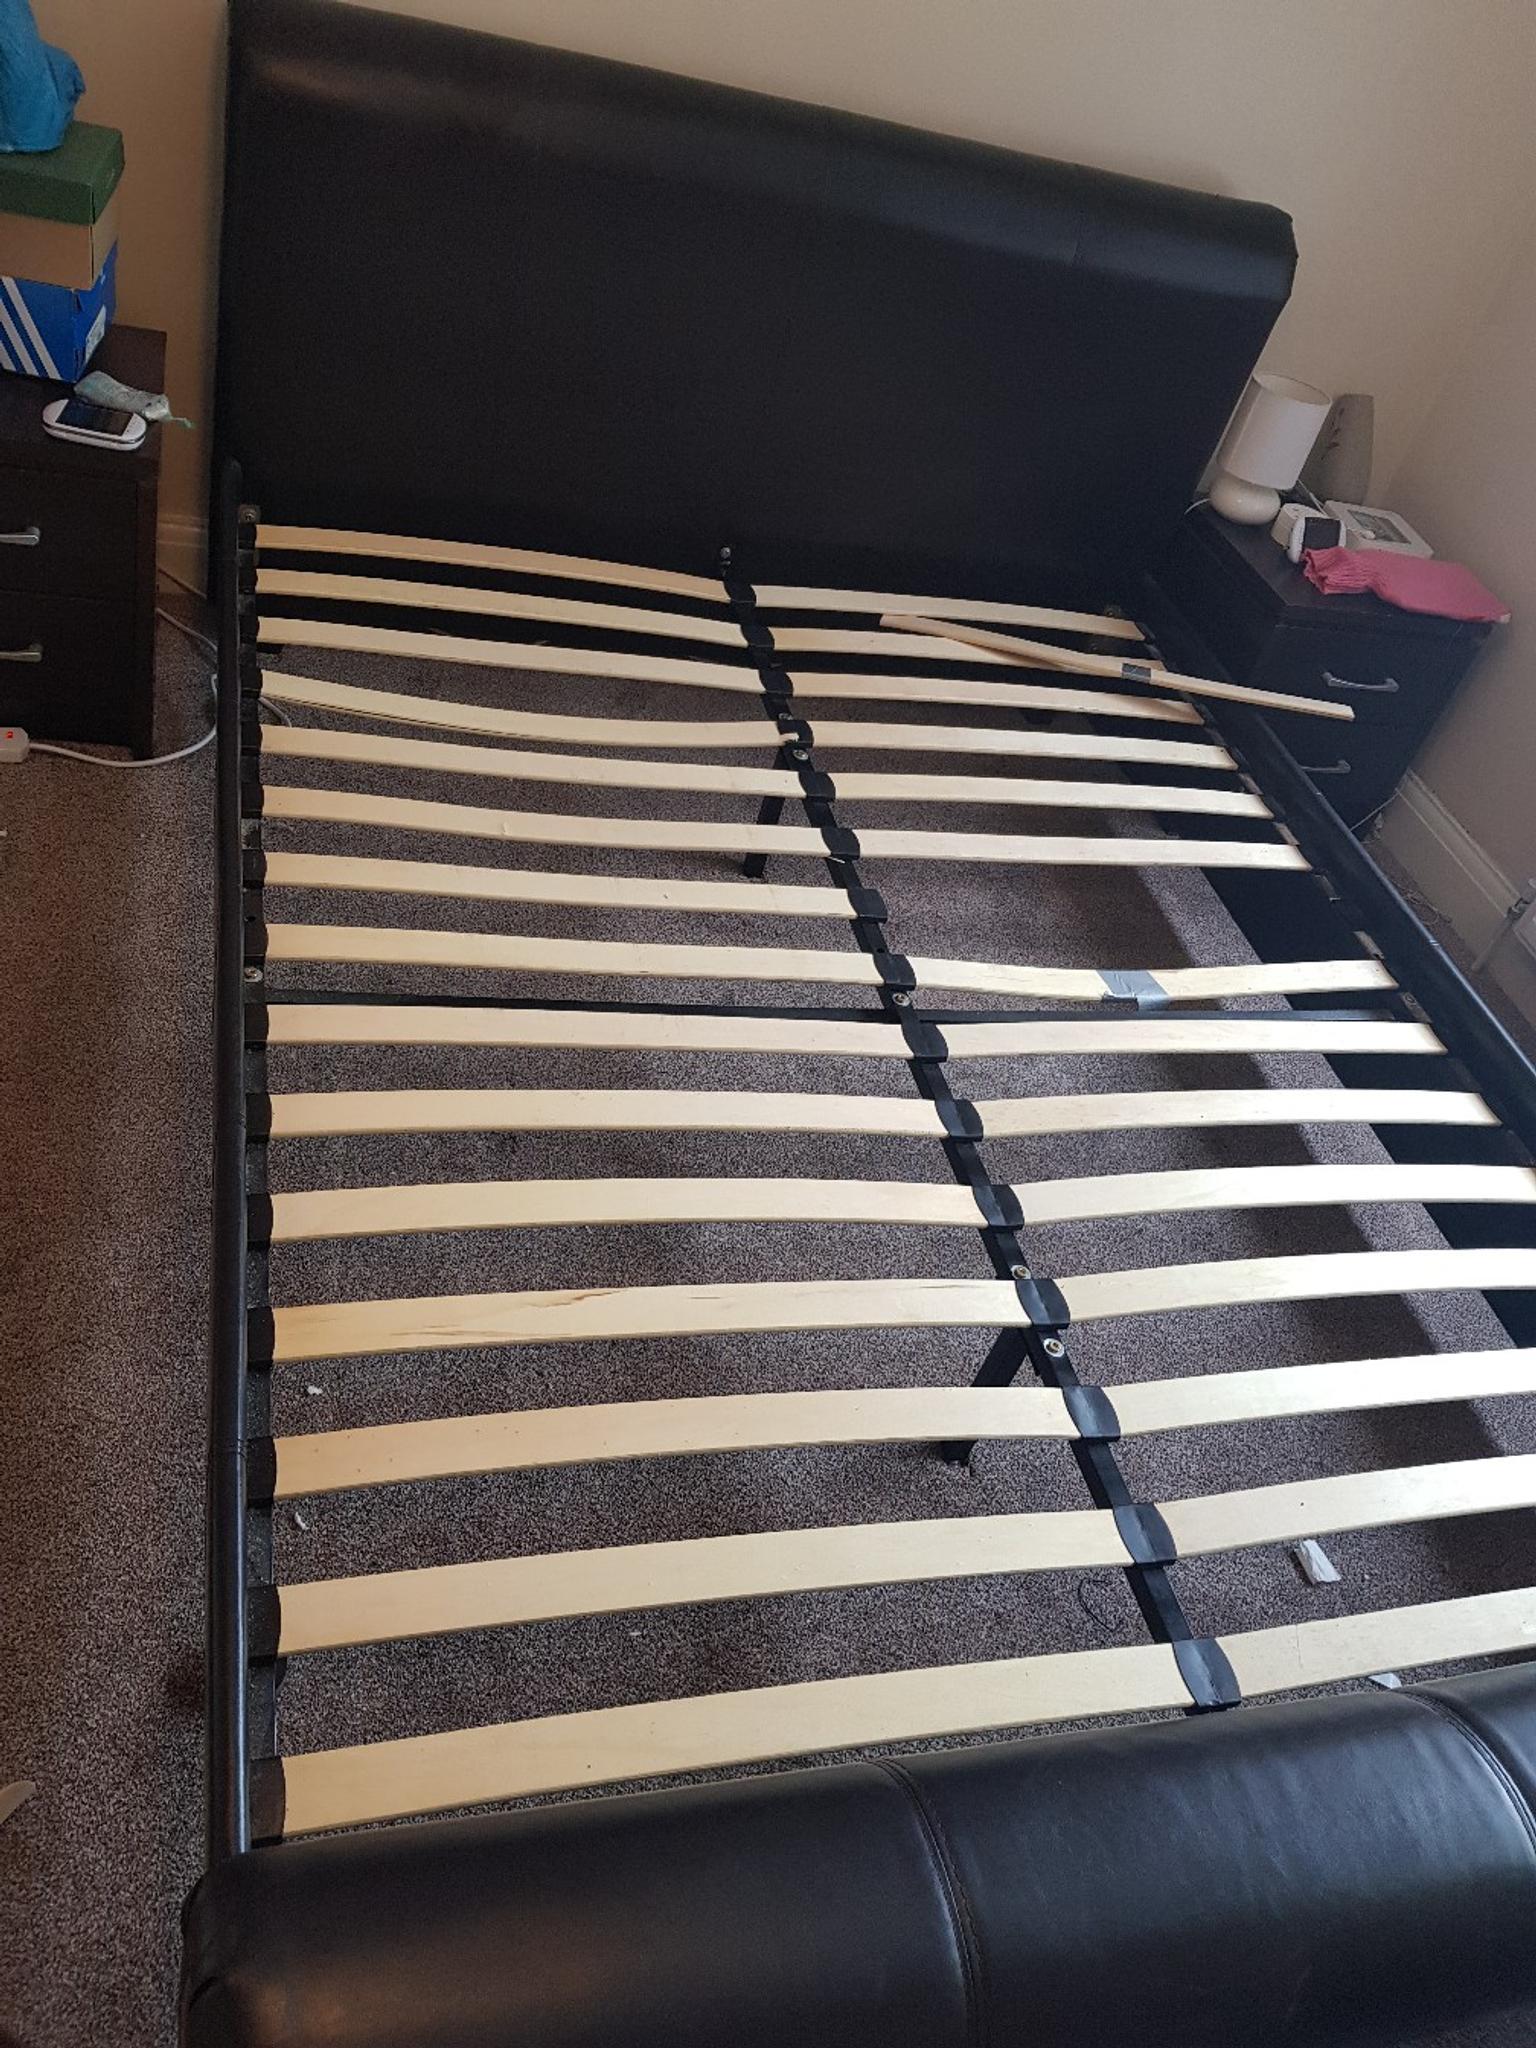 King Size Ottoman Bed Frame Used In, Used King Size Bed Rails